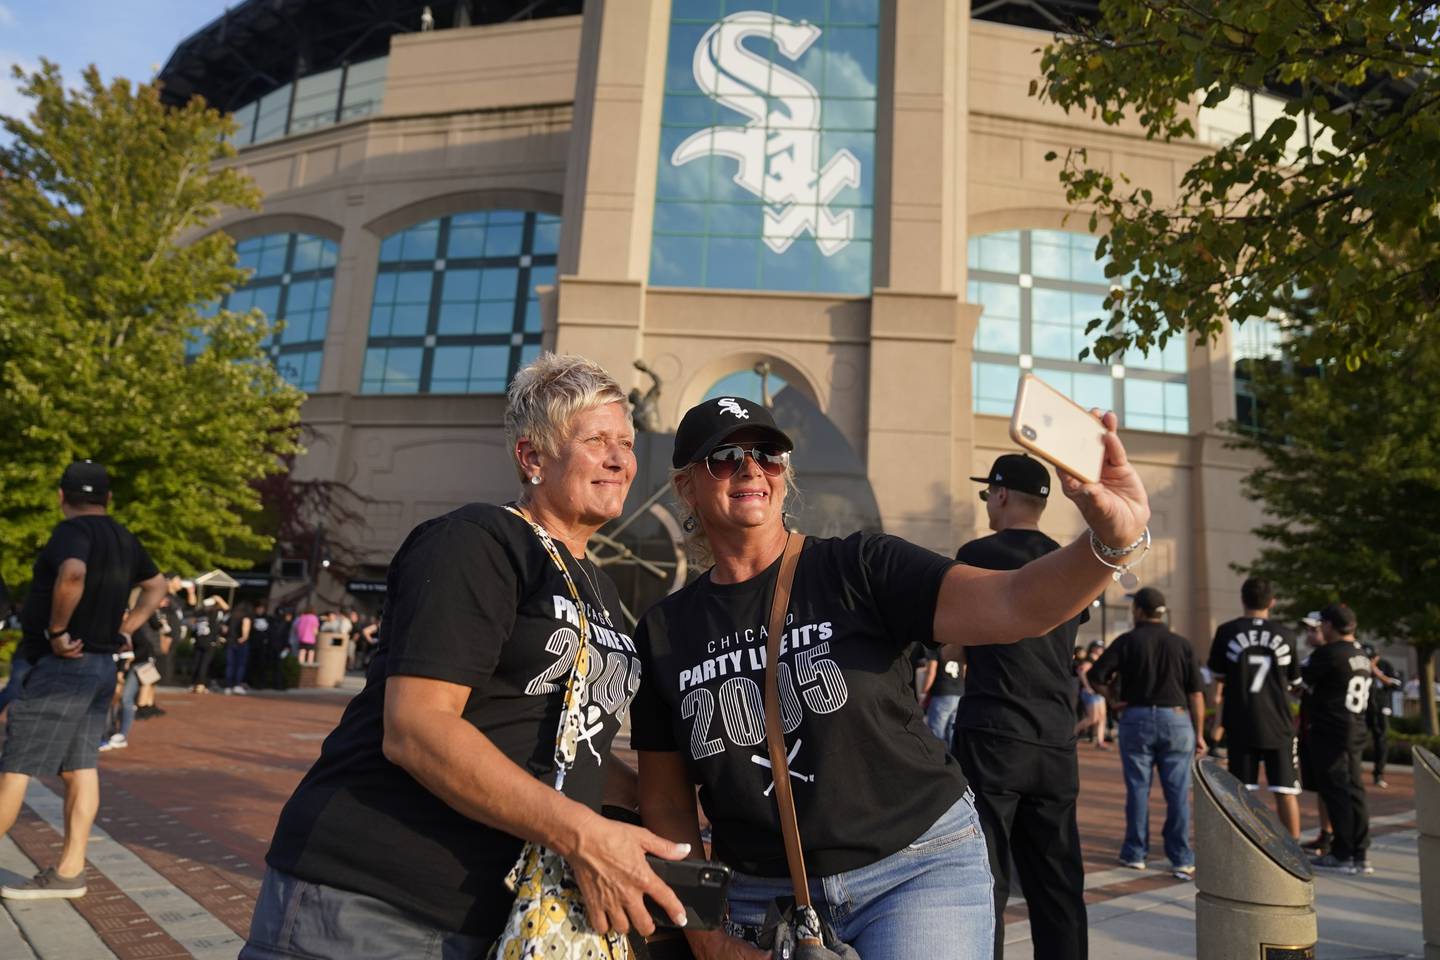 Chicago White Sox fans Debbie Peisker, left, and Cindy Stockle pose for a photo before Game 3 of a baseball American League Division Series against the Houston Astros, Sunday, Oct. 10, 2021, in Chicago. (AP Photo/Charles Rex Arbogast)